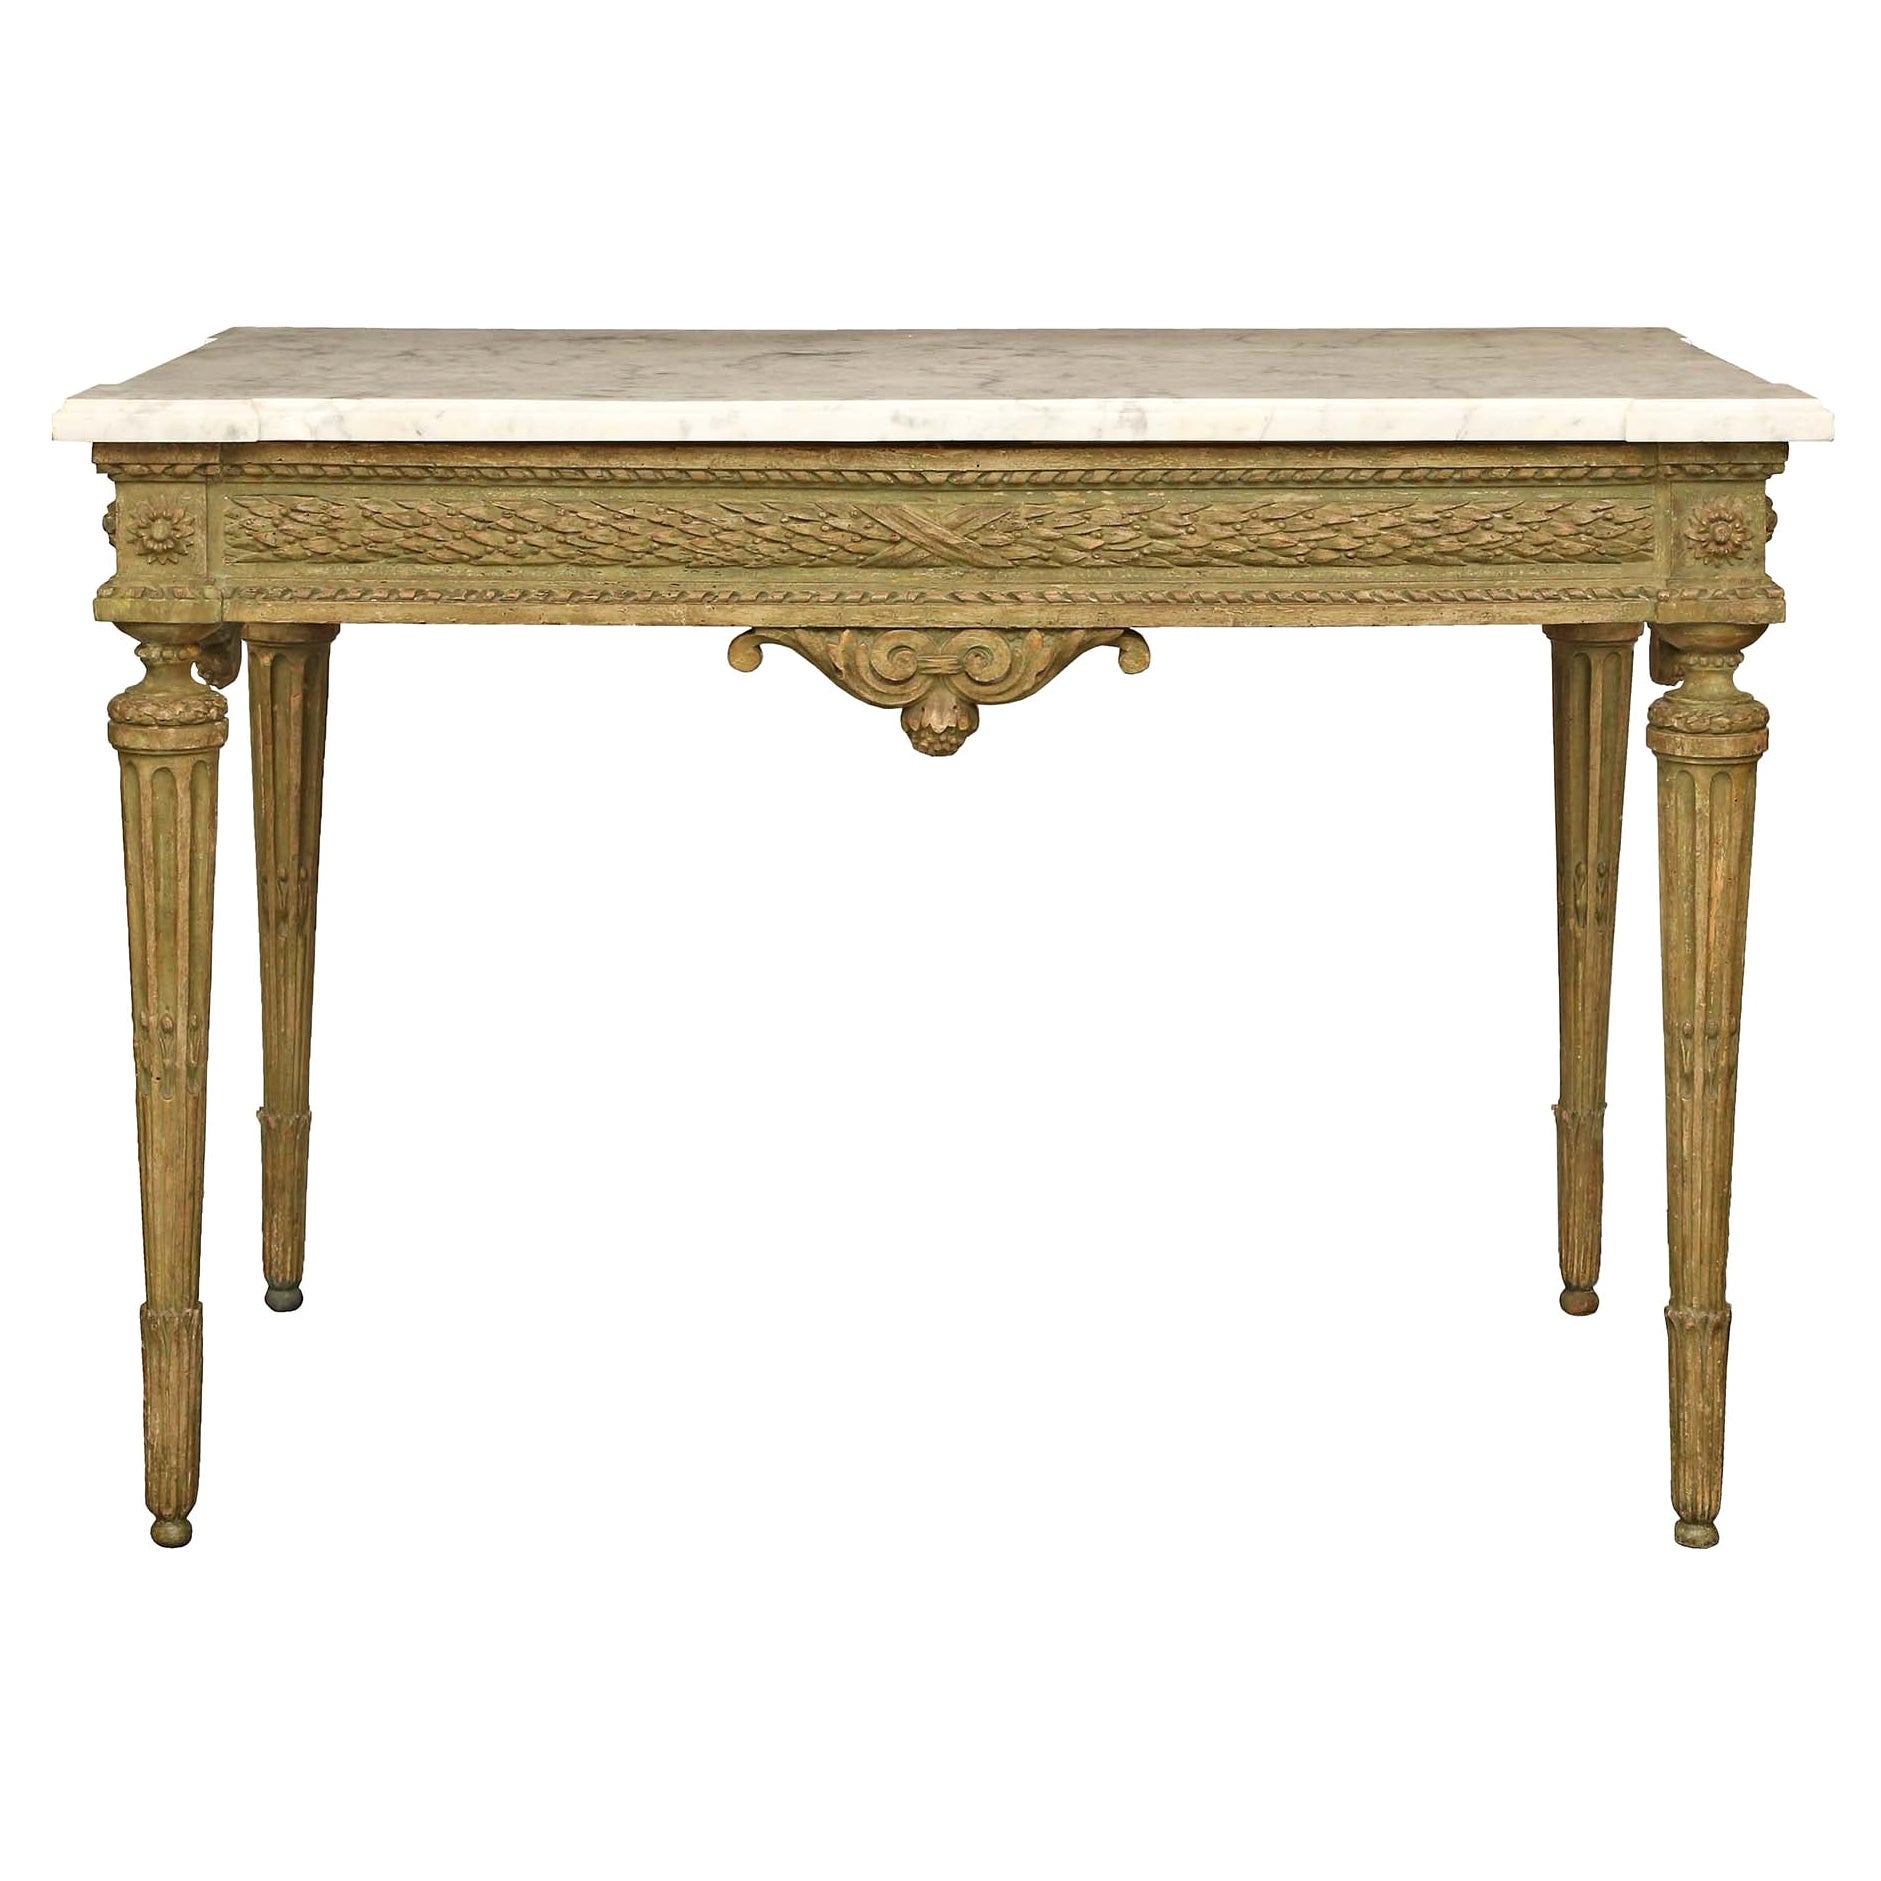 French 18th Century Louis XVI Period Patinated Center Table